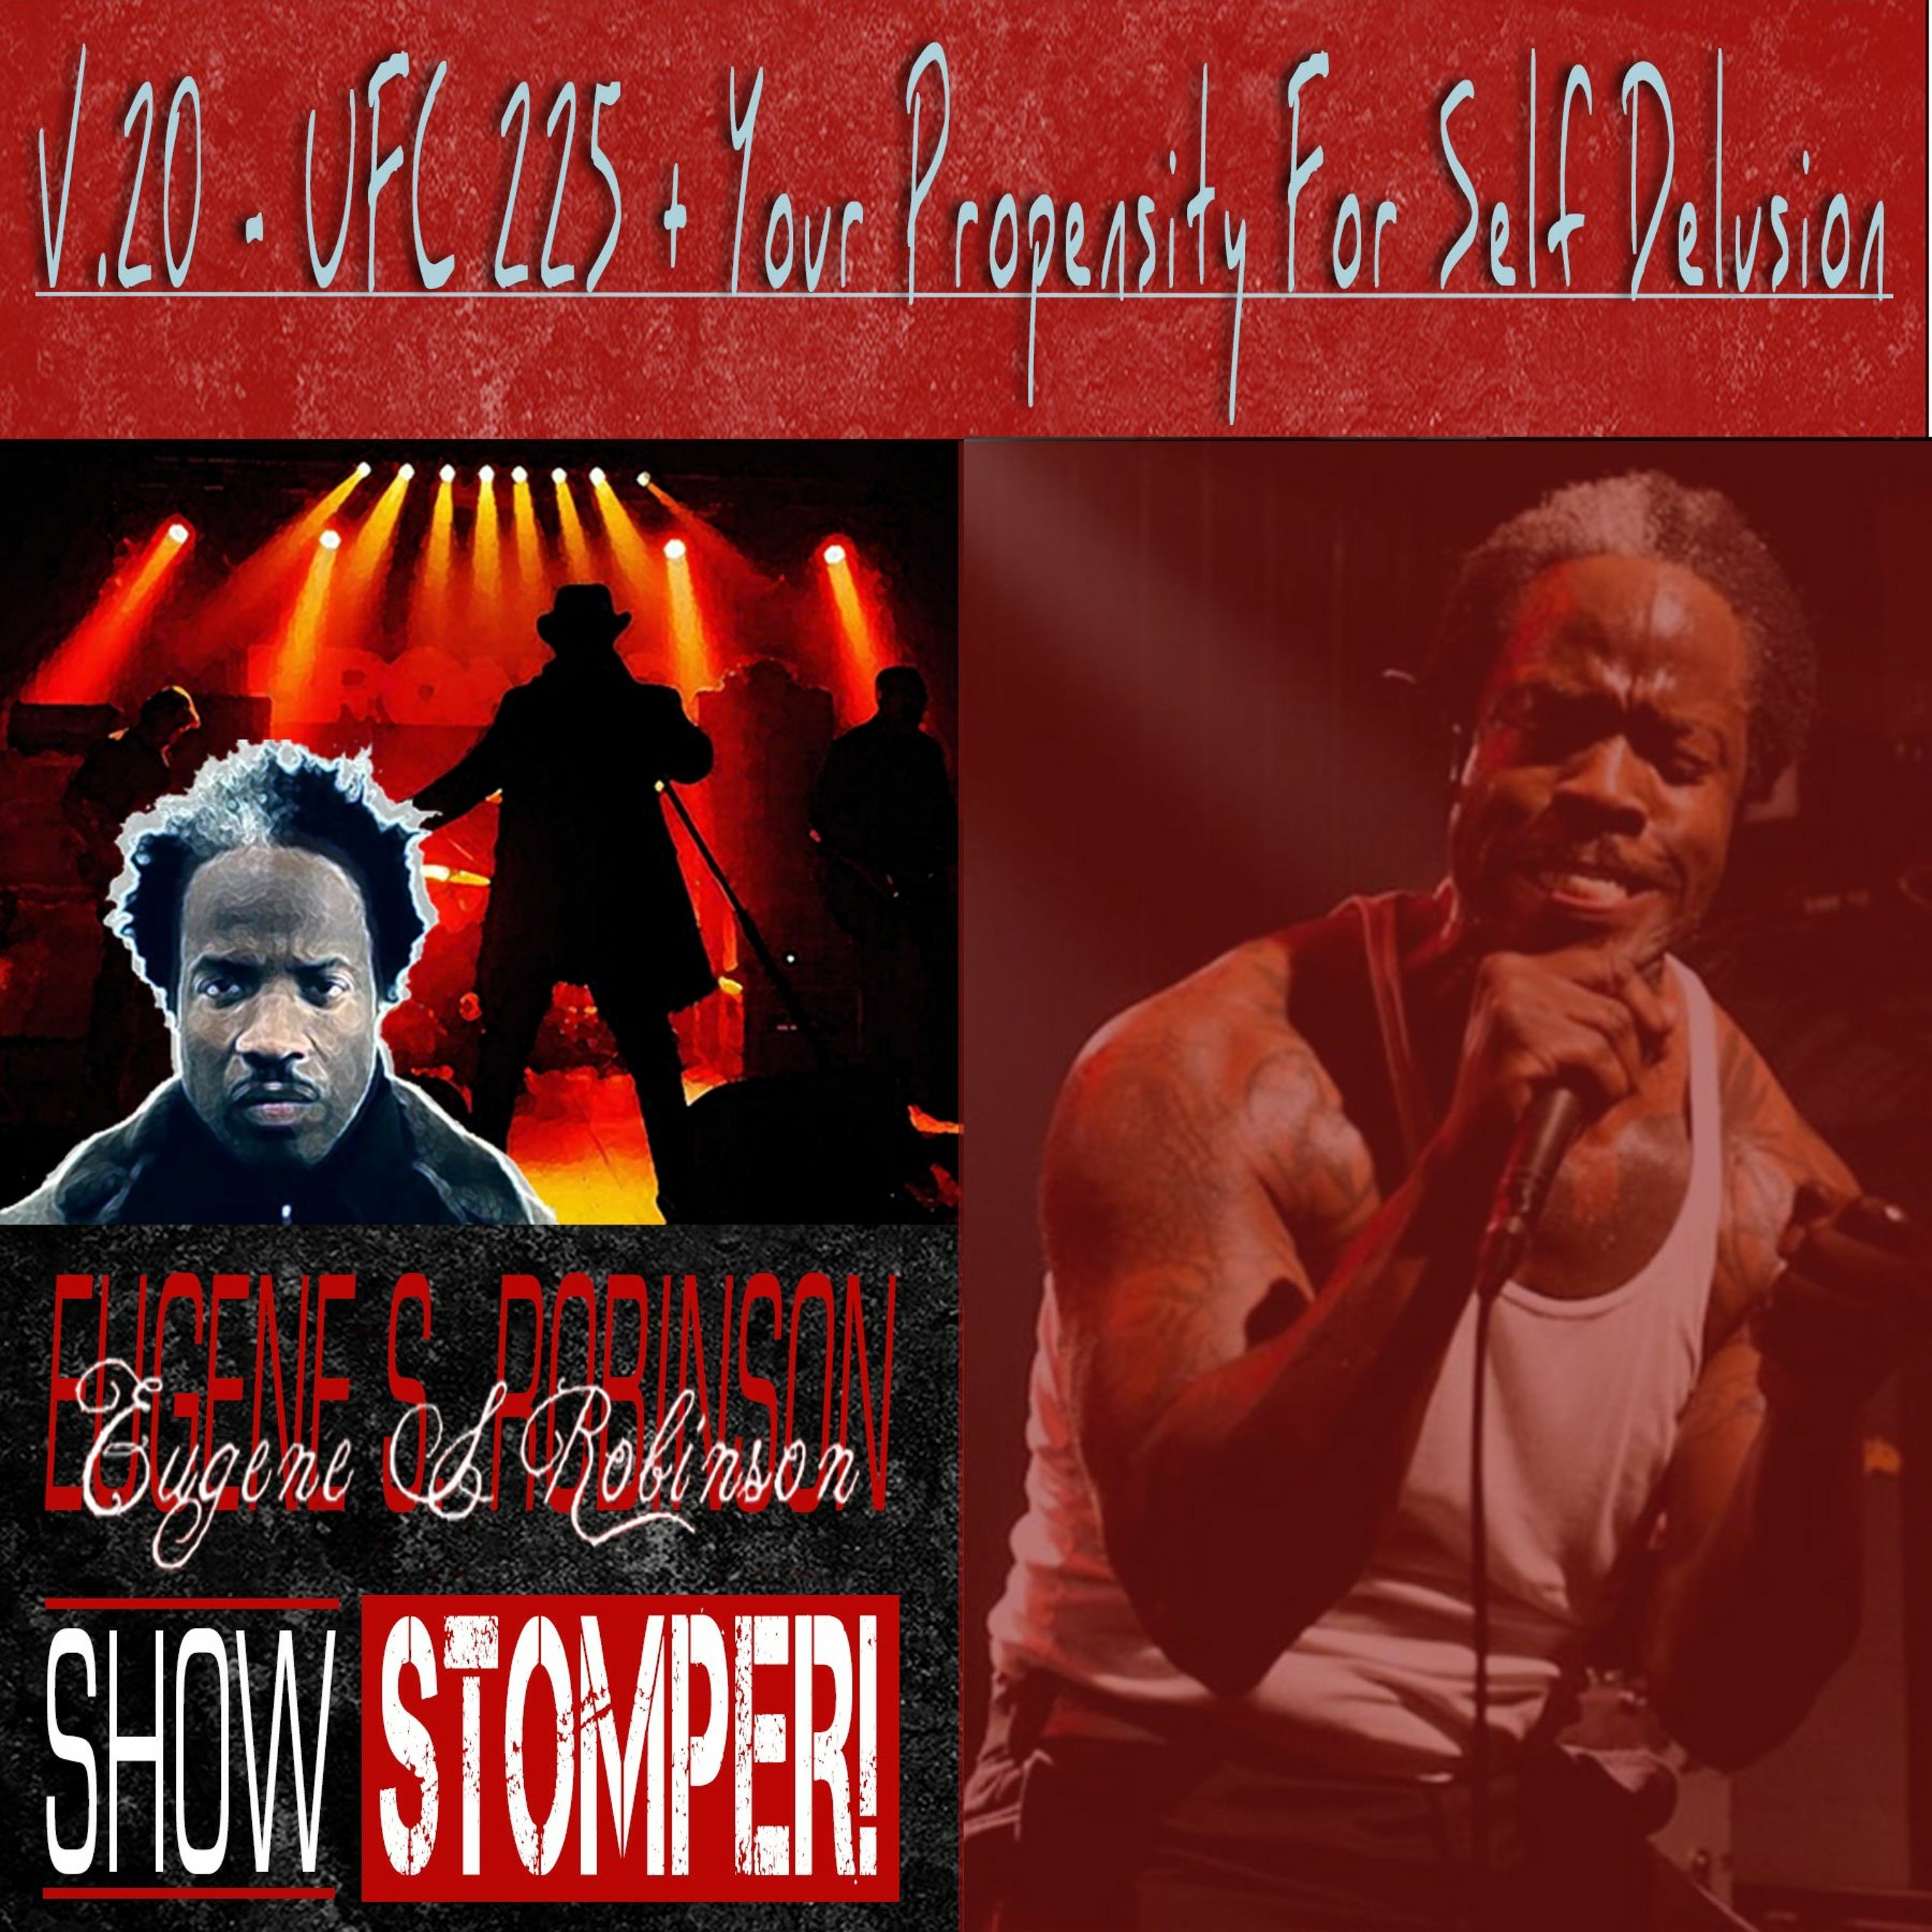 The Eugene S. Robinson Show Stomper! V.20 - UFC 225 + Your Propensity For Self Delusion